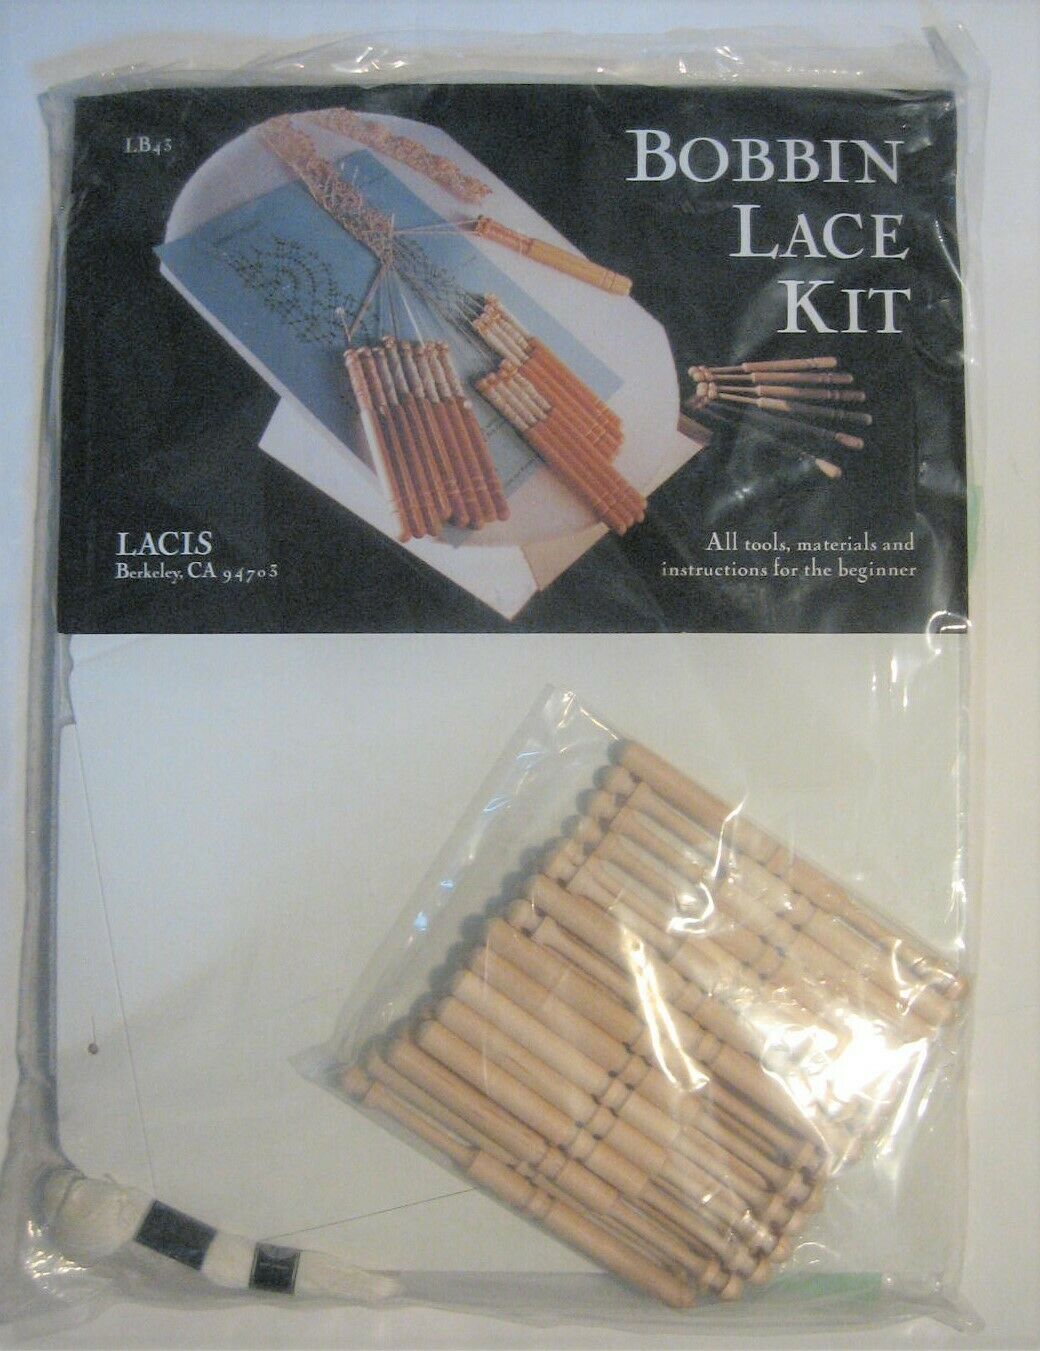 Bobbin Lace Kit Lb43 All Tools, Materials & Instructions For The Beginner New